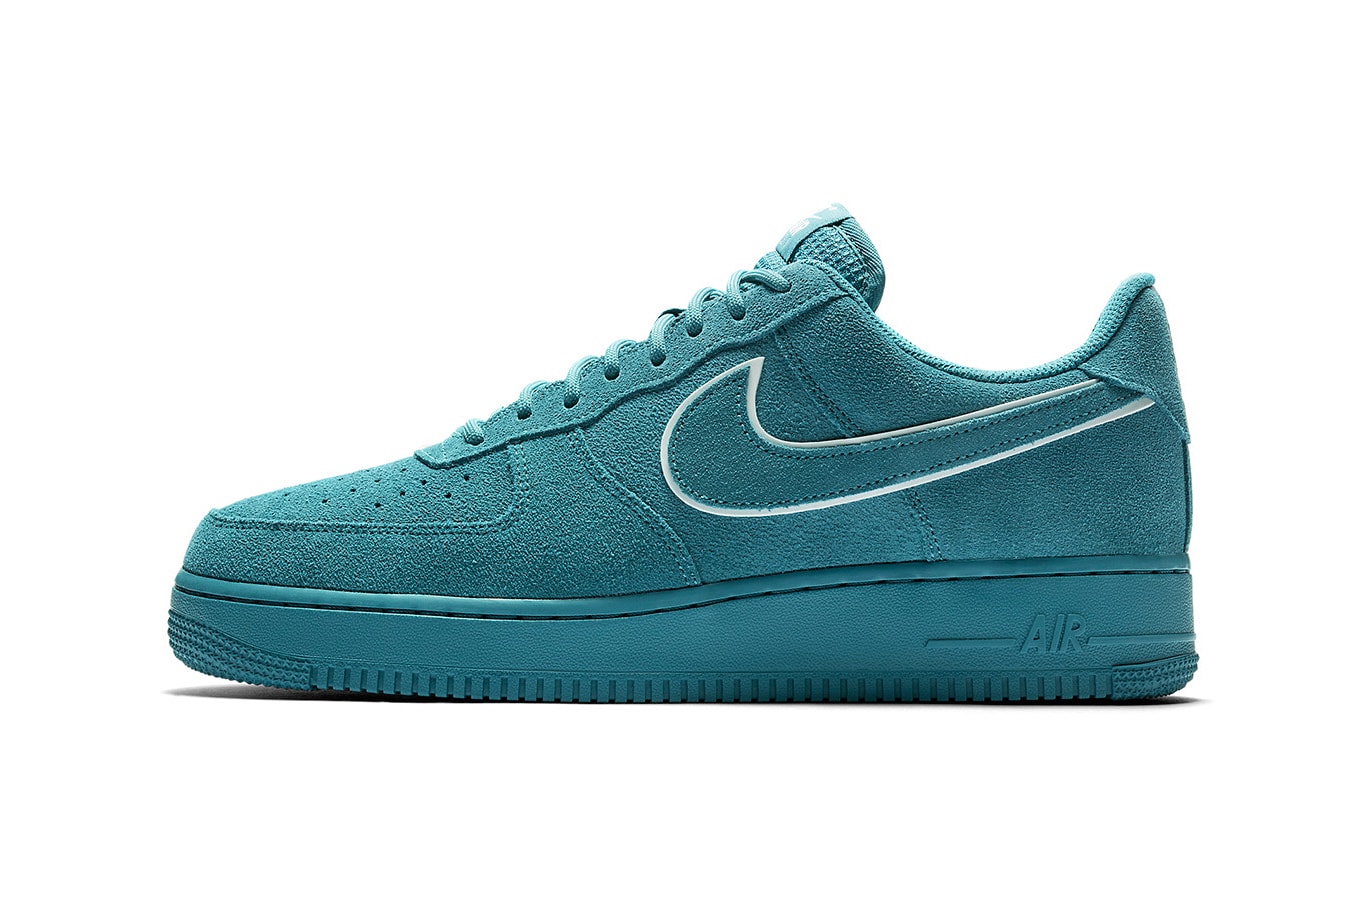 Nike air force 1 low suede pack pink turquoise blue off-white cream beige tonal sneakers womens mens unisex